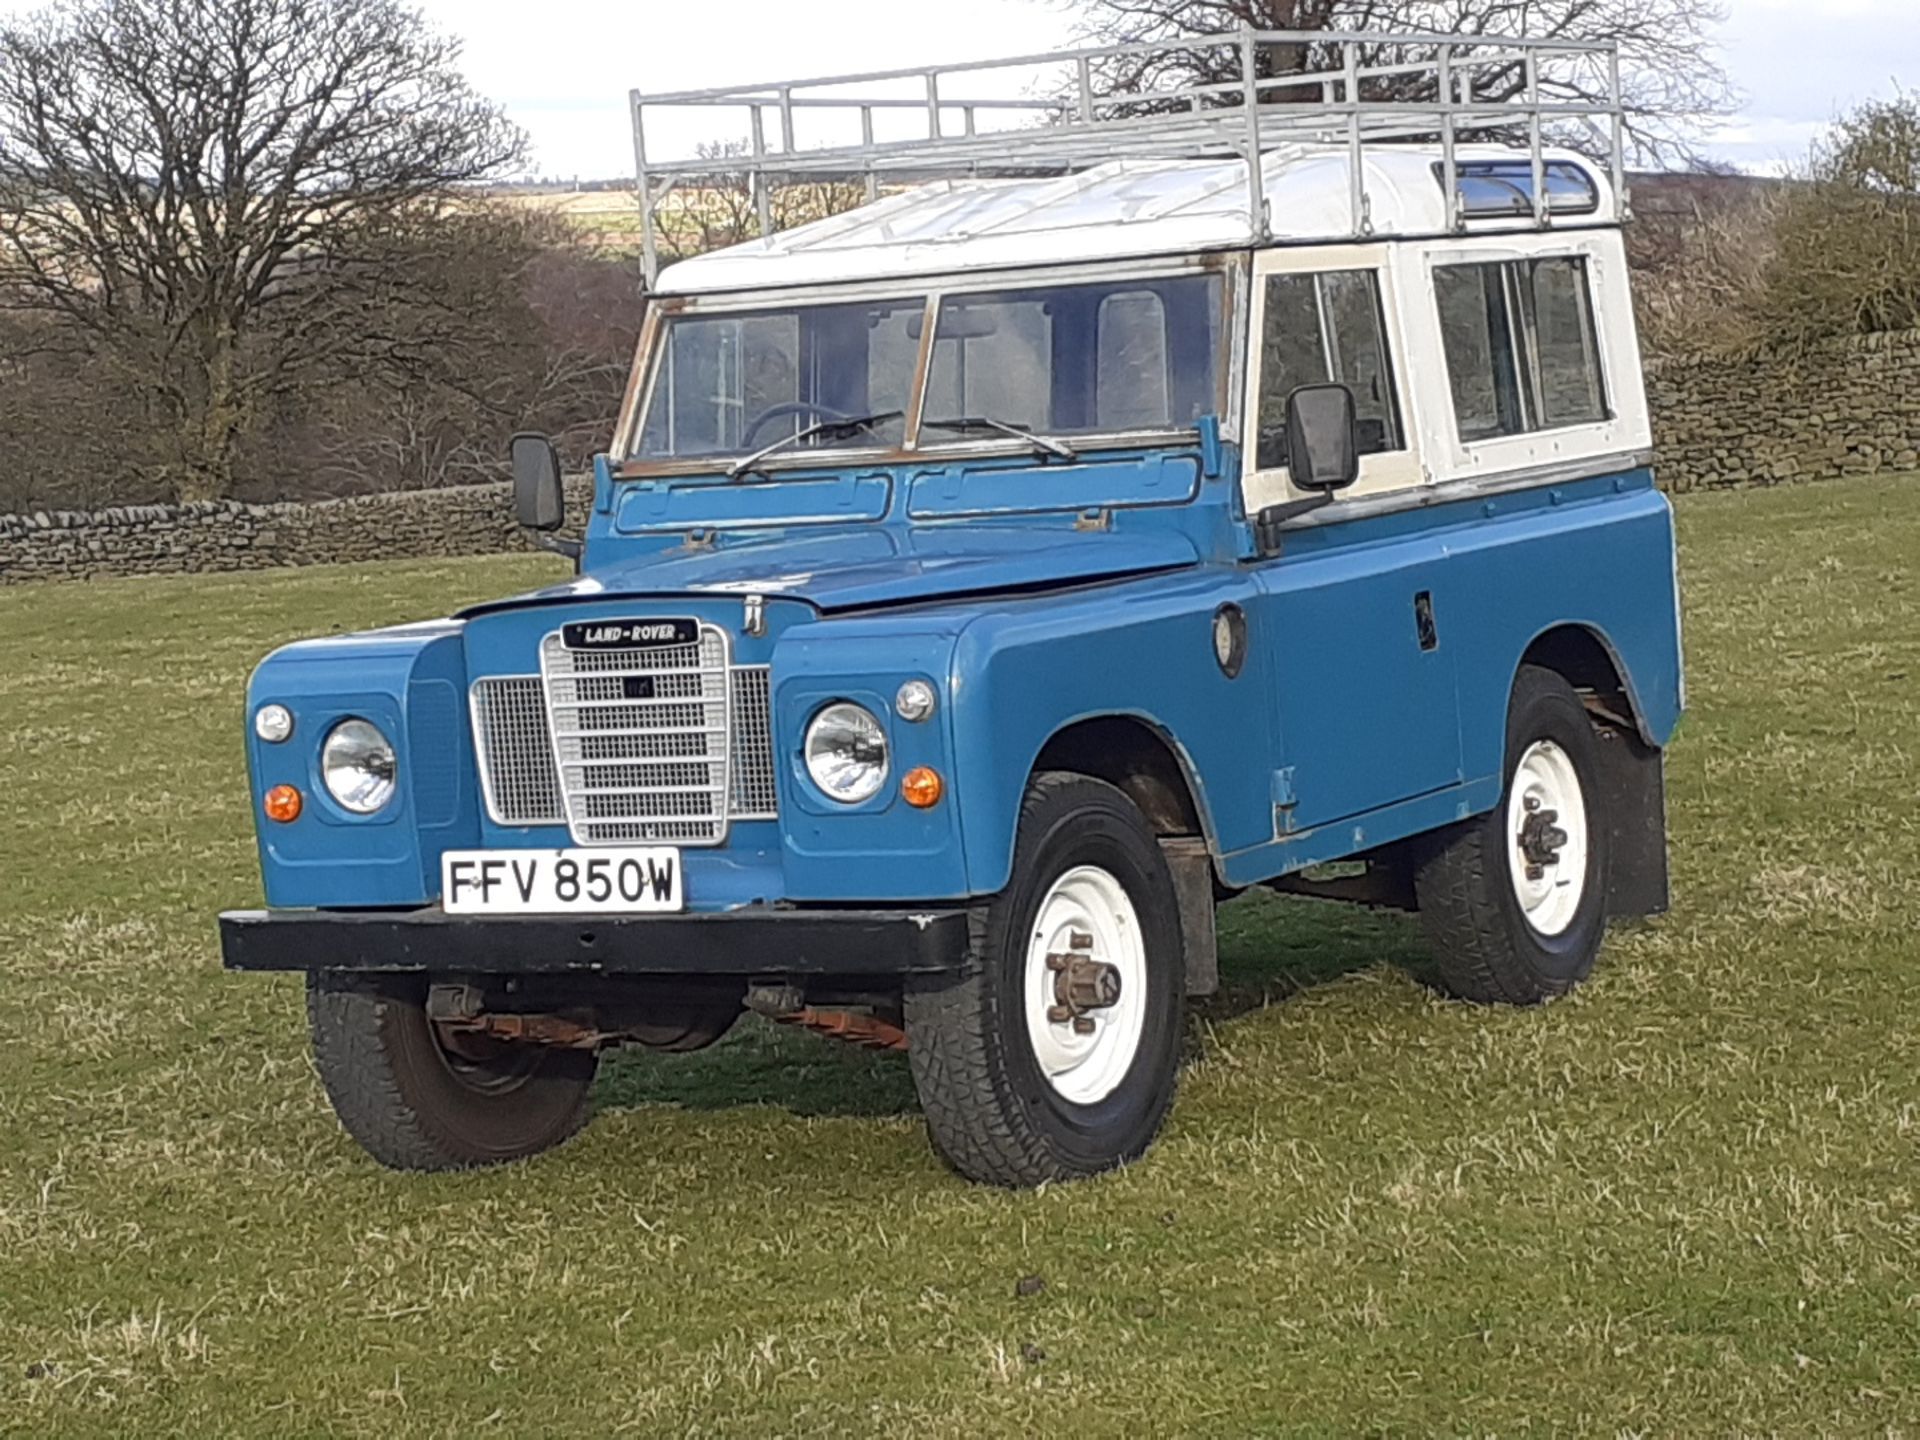 1980 LAND ROVER SERIES III CLASSIC STATION WAGON, TAX AND MOT EXEMPT *NO VAT* - Image 2 of 22